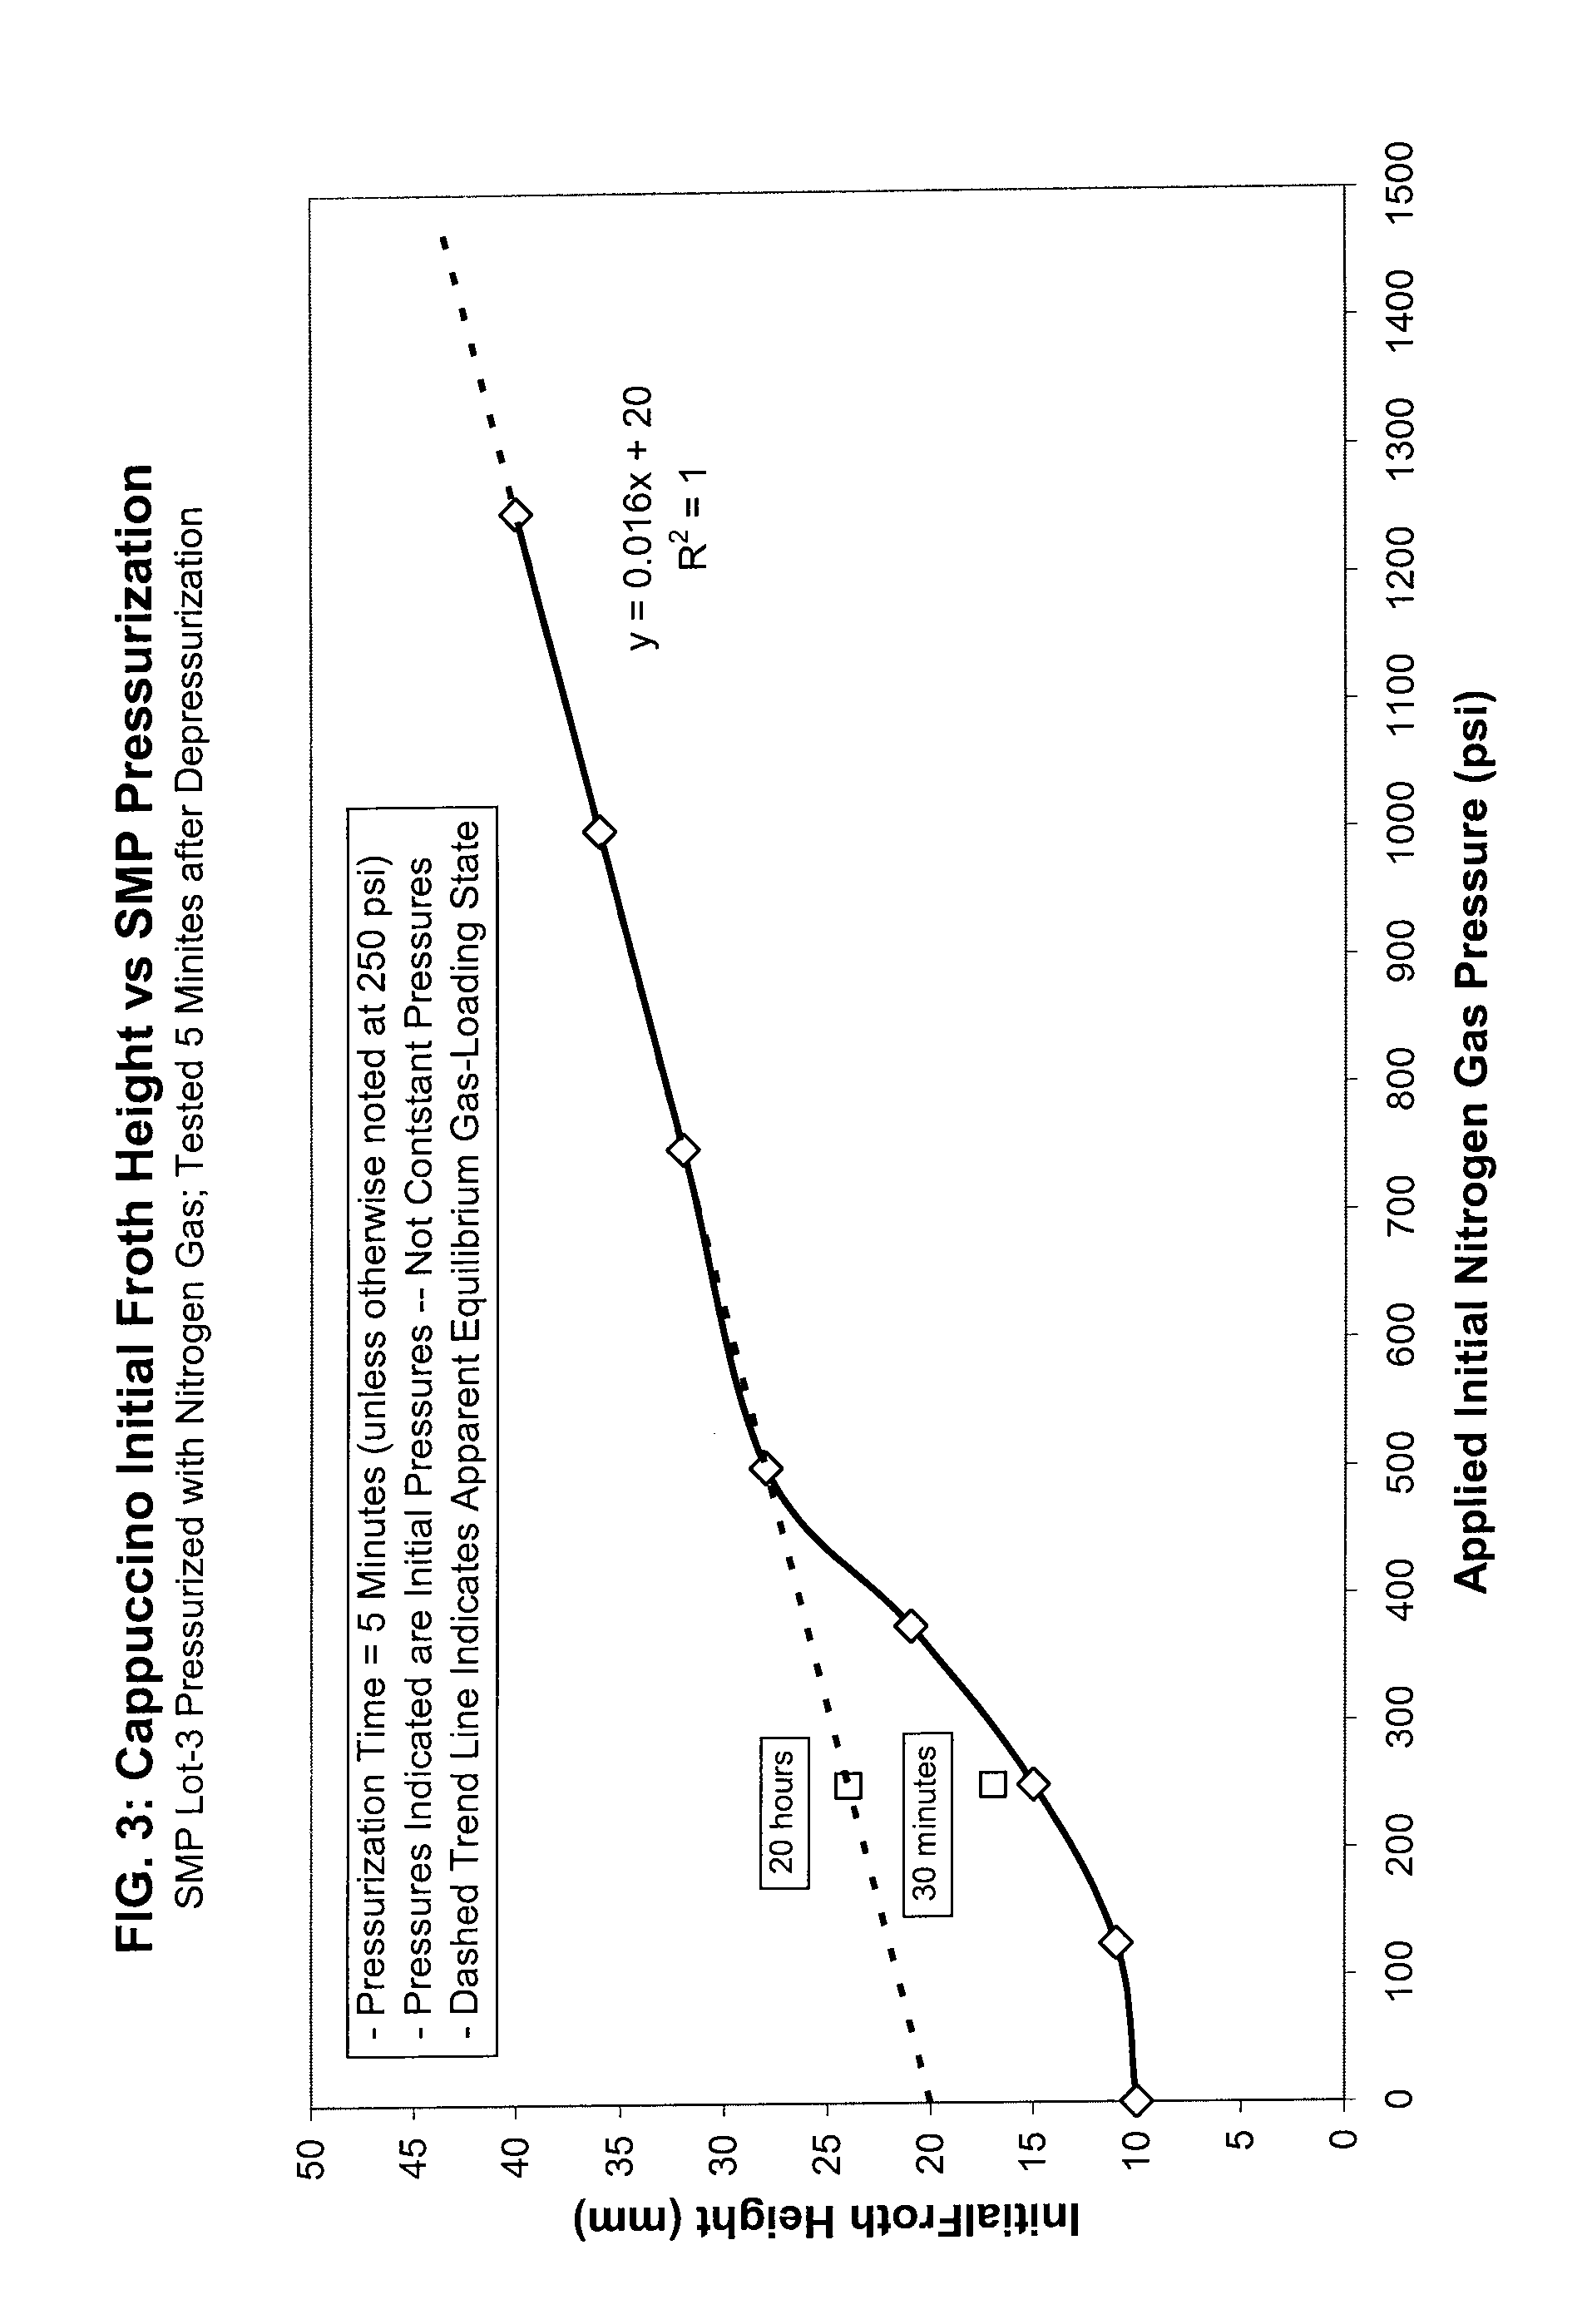 Gas-effusing compositions and methods of making and using same